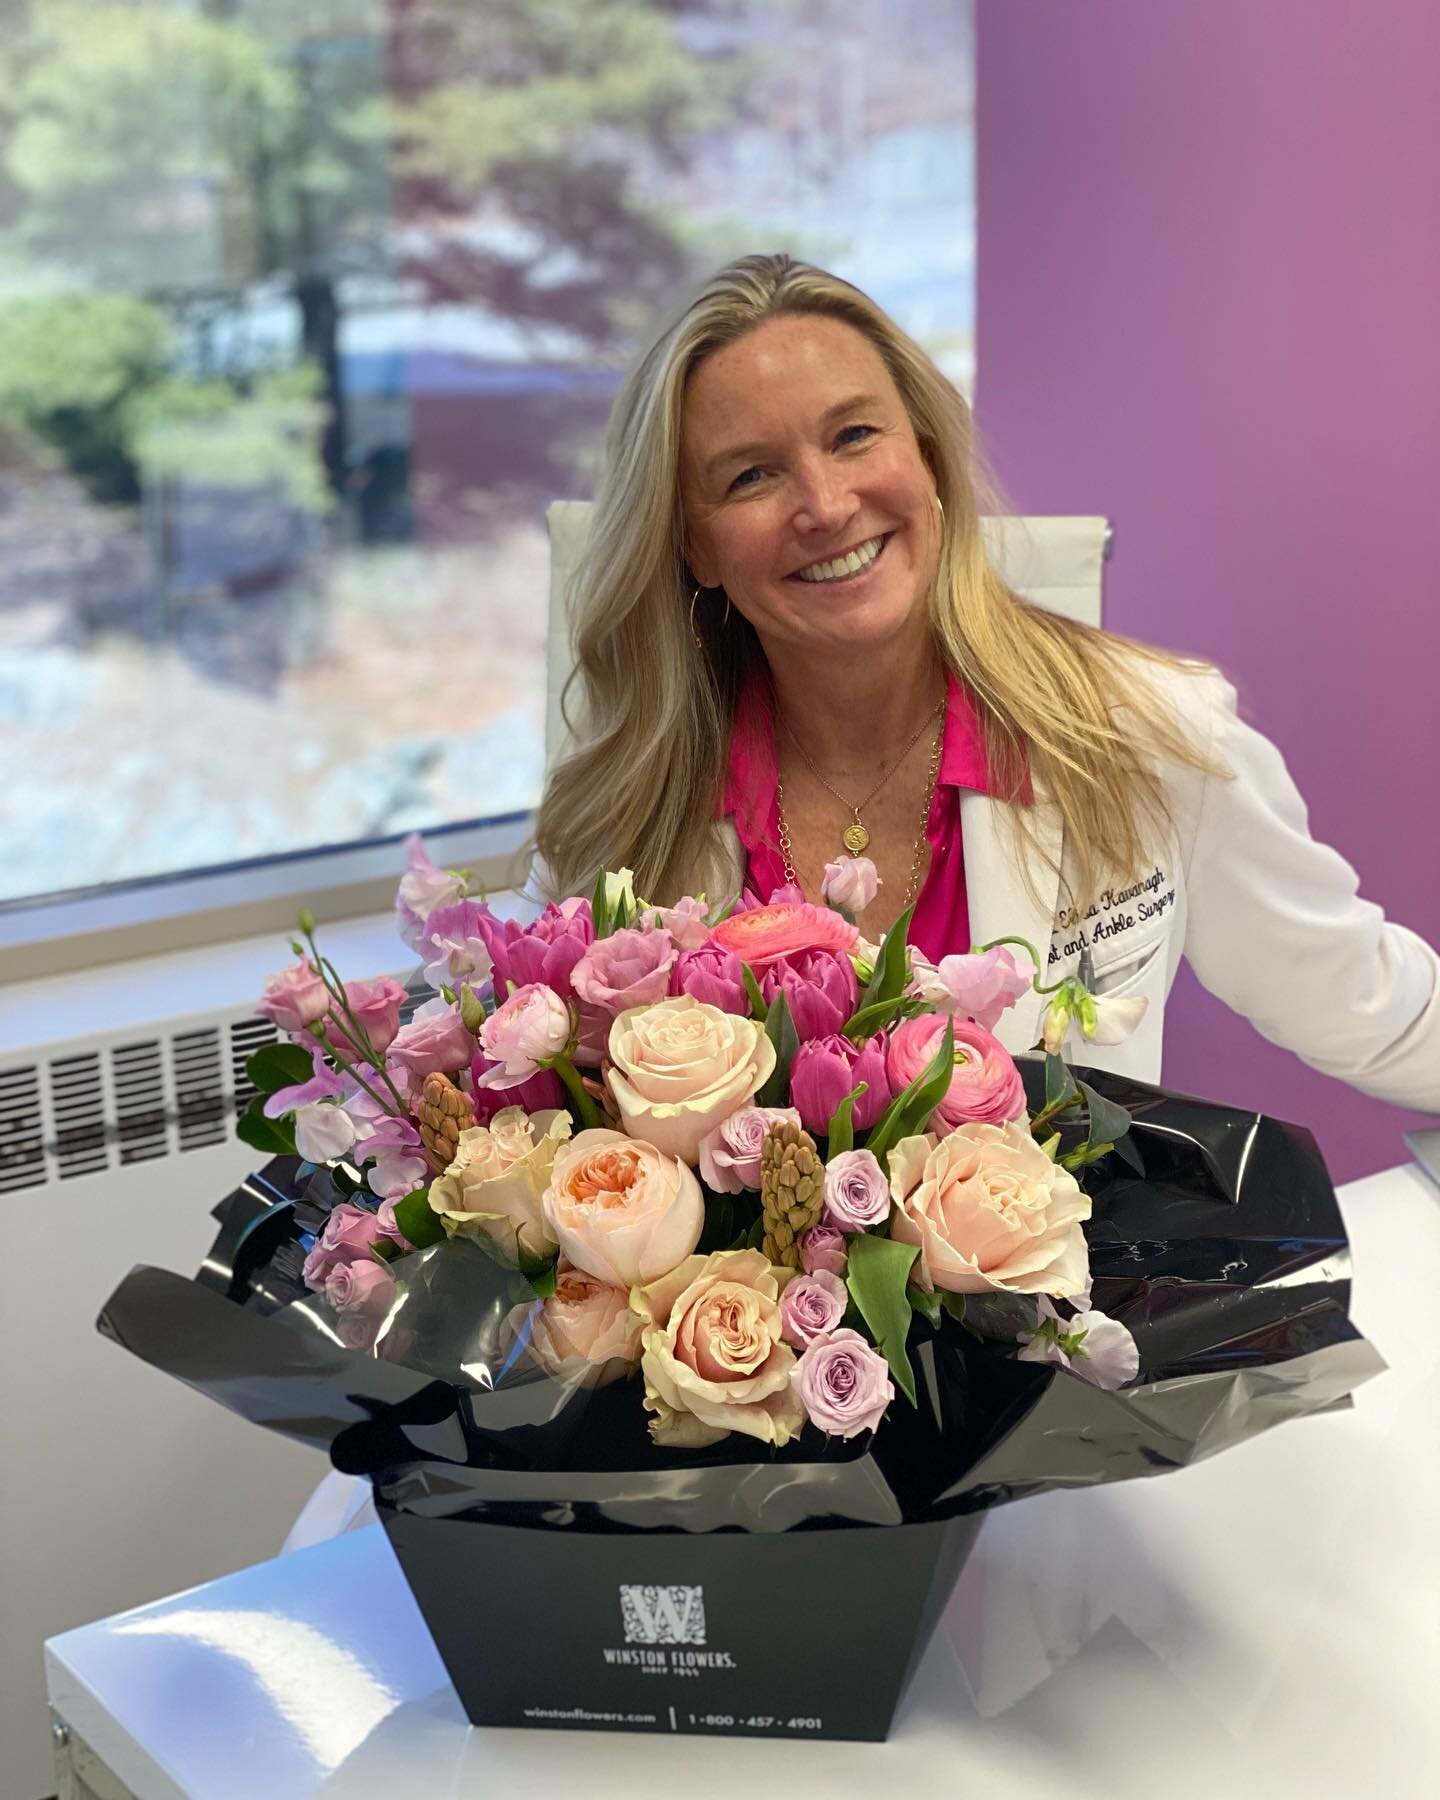 Wishing our beautiful boss lady a very Happy Birthday! We love you Dr. Kavanagh!!! 🌸💕🦶🏼 

#birthday #womensupportingwomen #podiatry